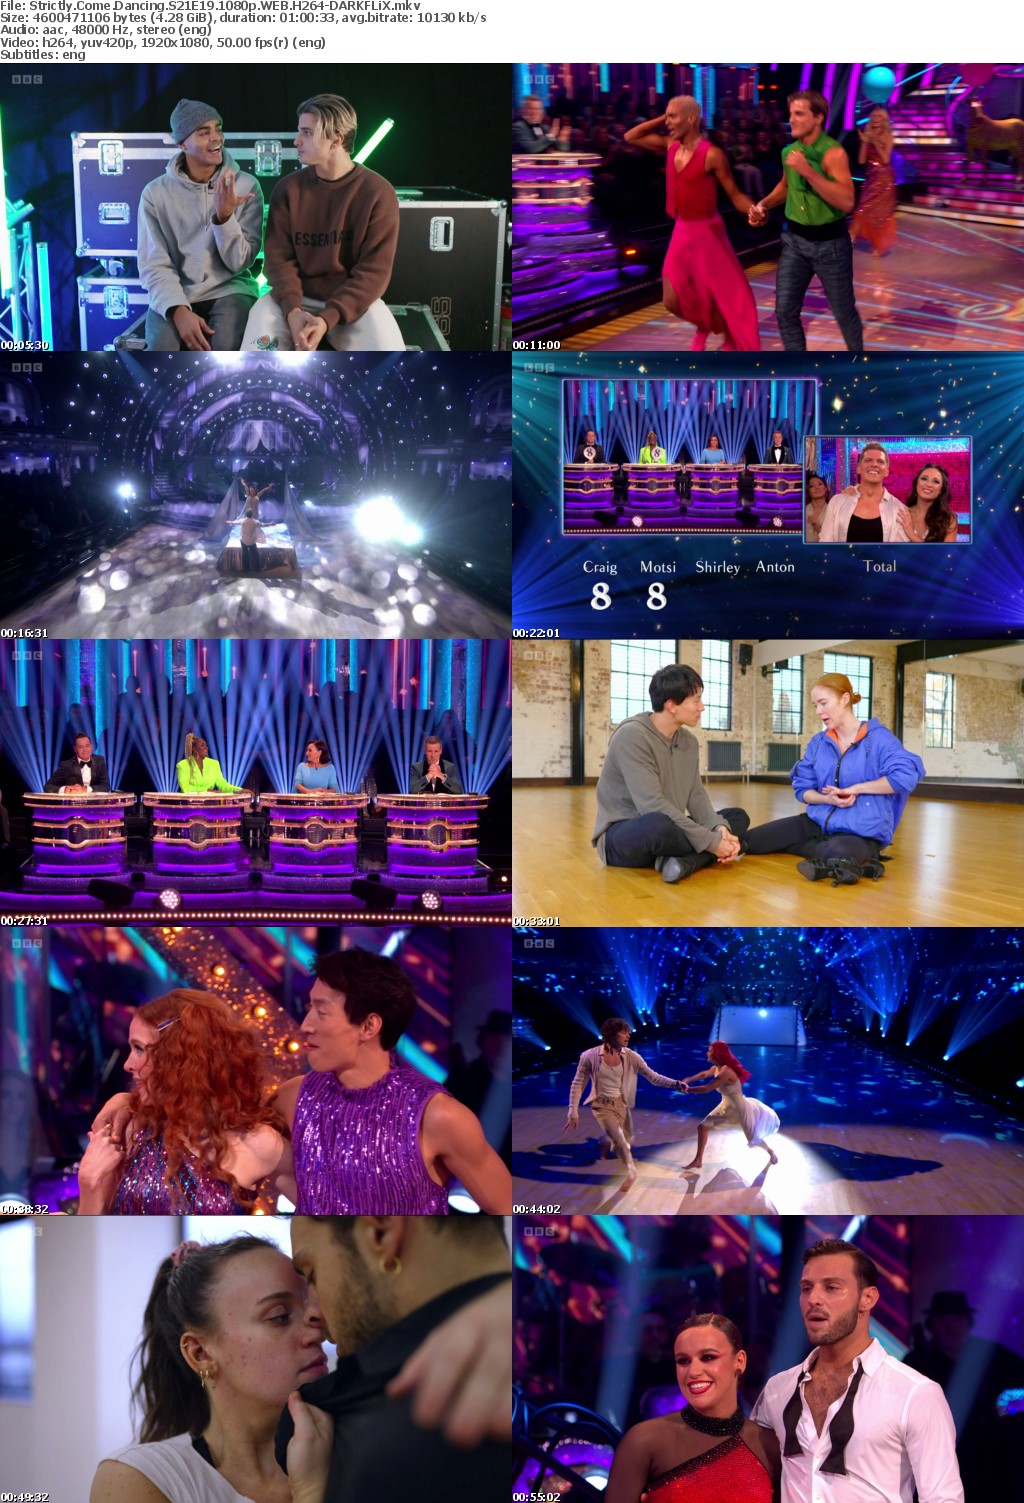 Strictly Come Dancing S21E19 1080p WEB H264-DARKFLiX